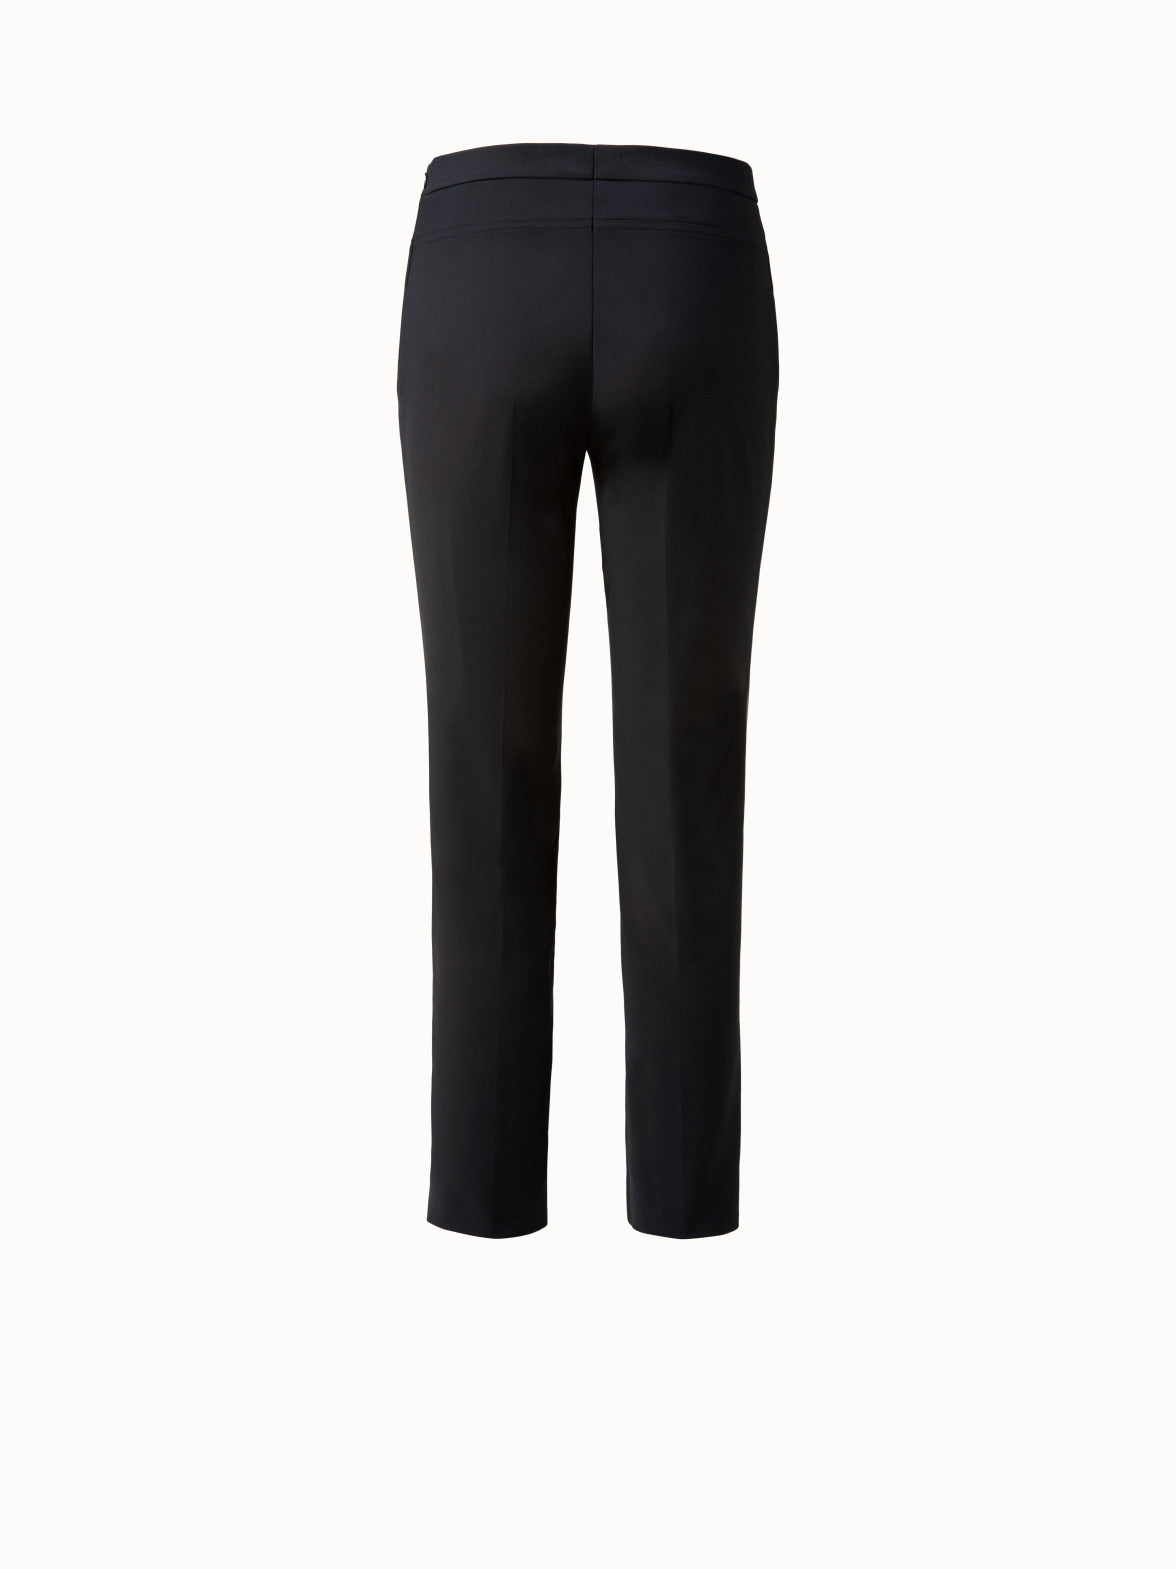 Tailored trousers - Black - Ladies | H&M IN